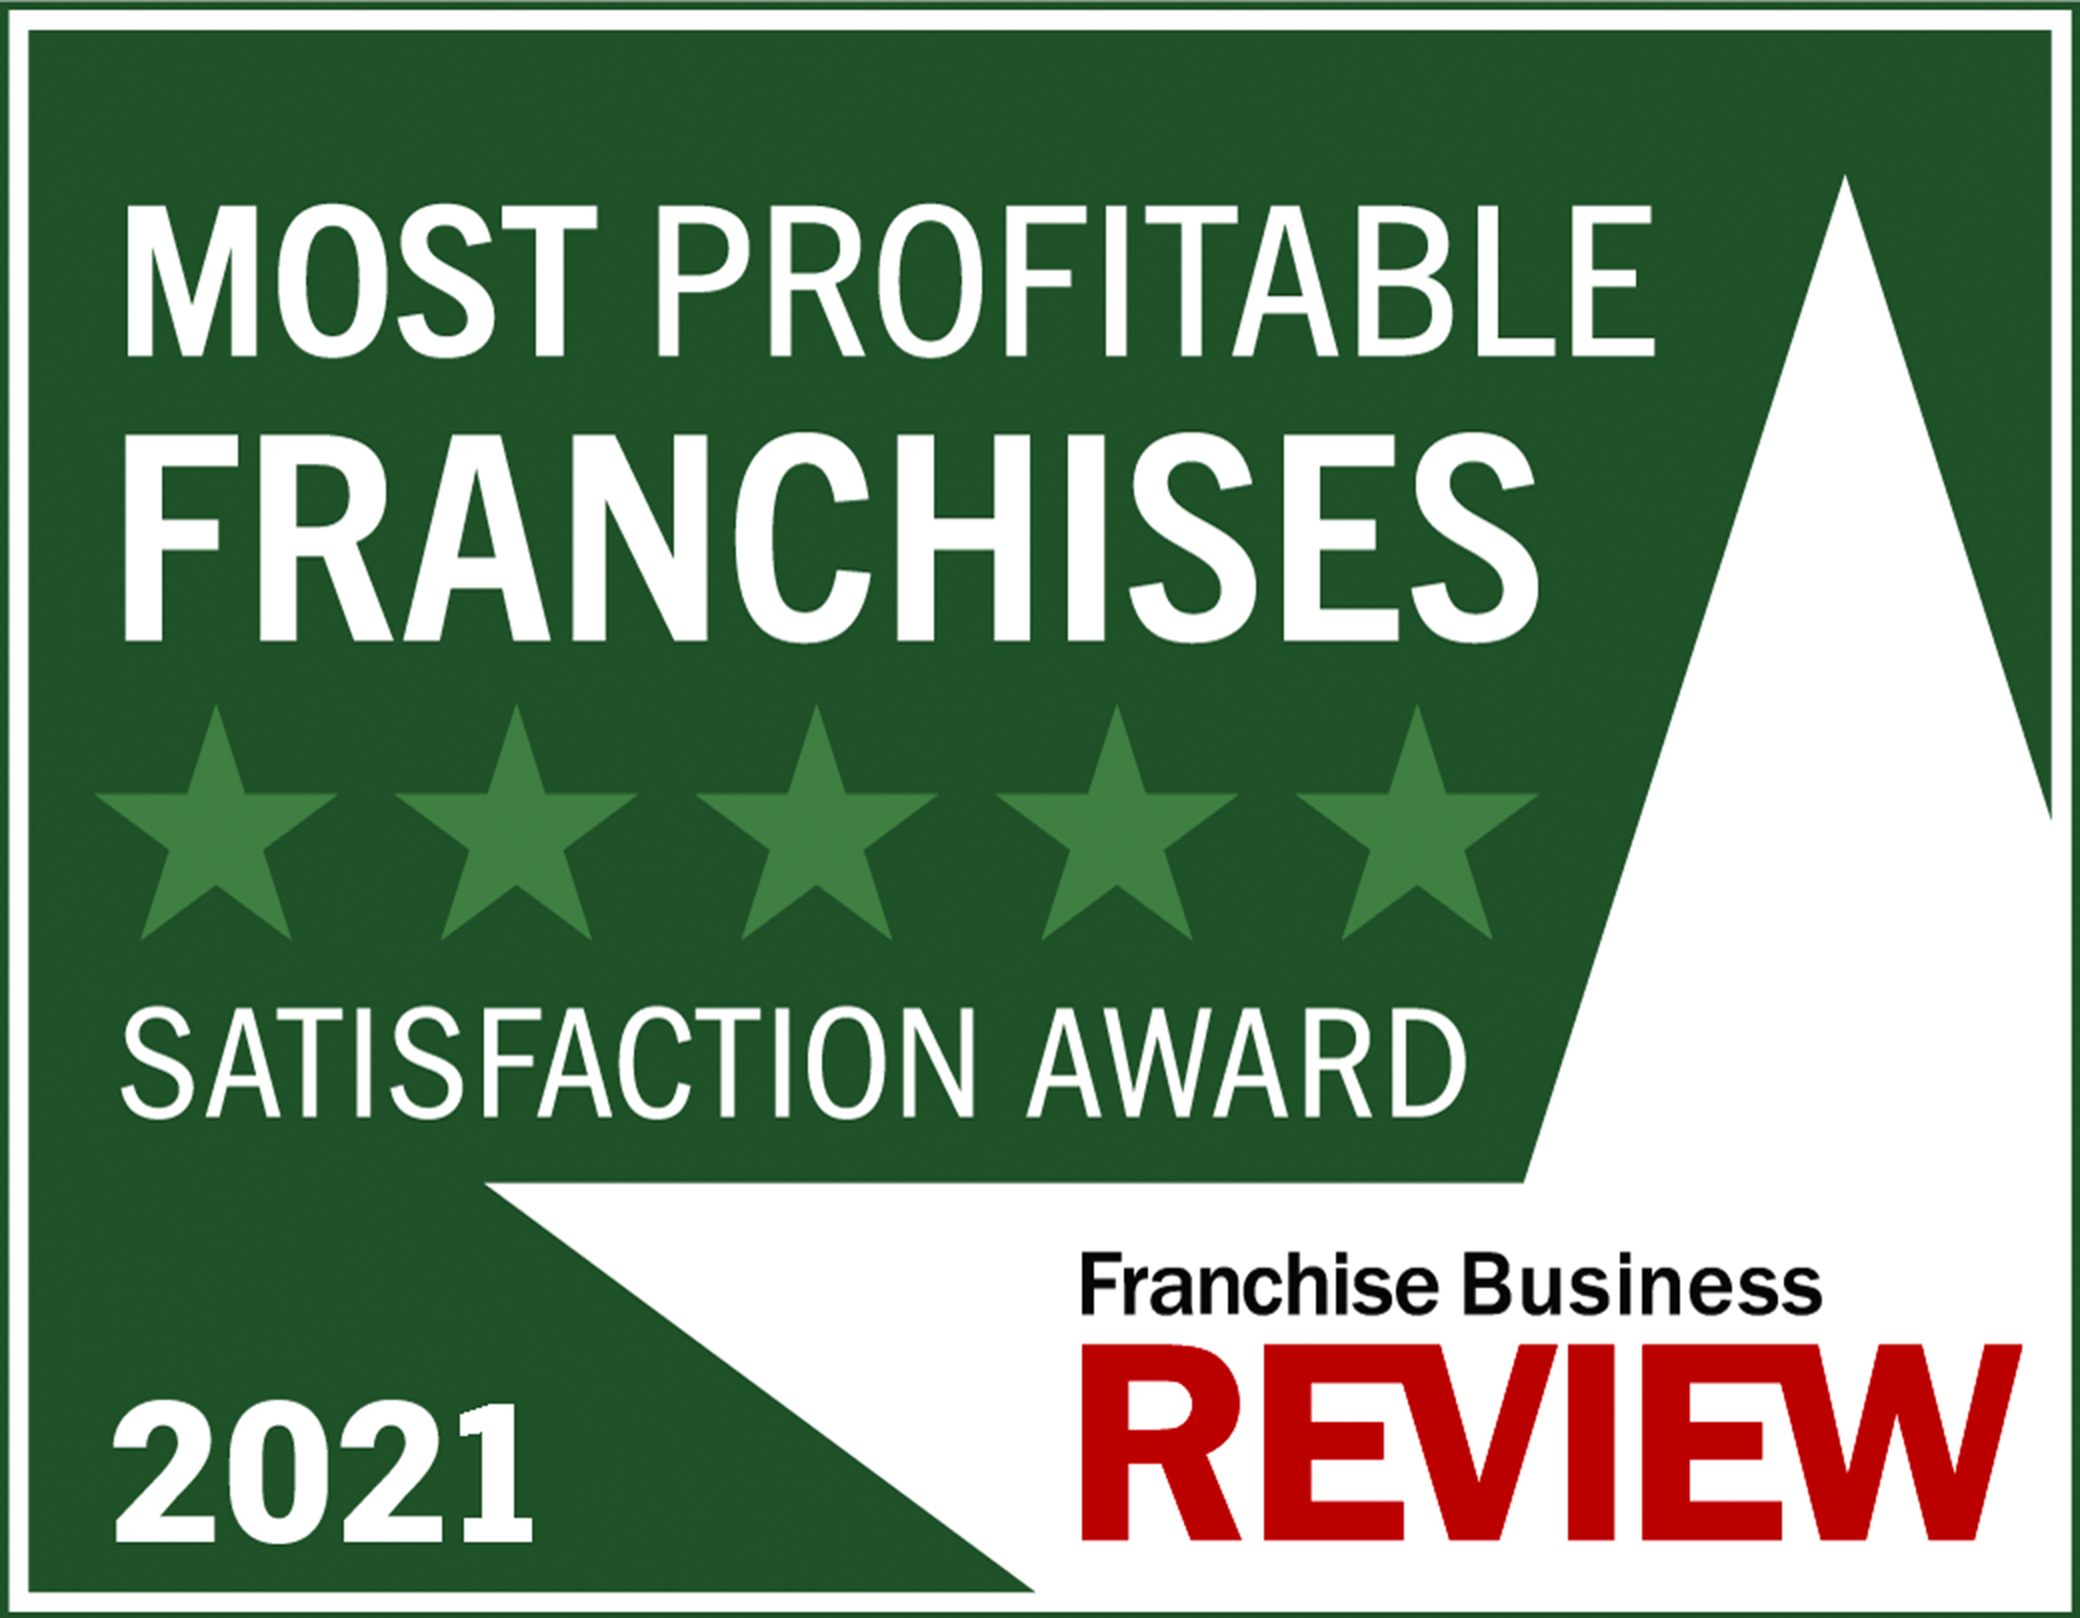 Franchise Business Review